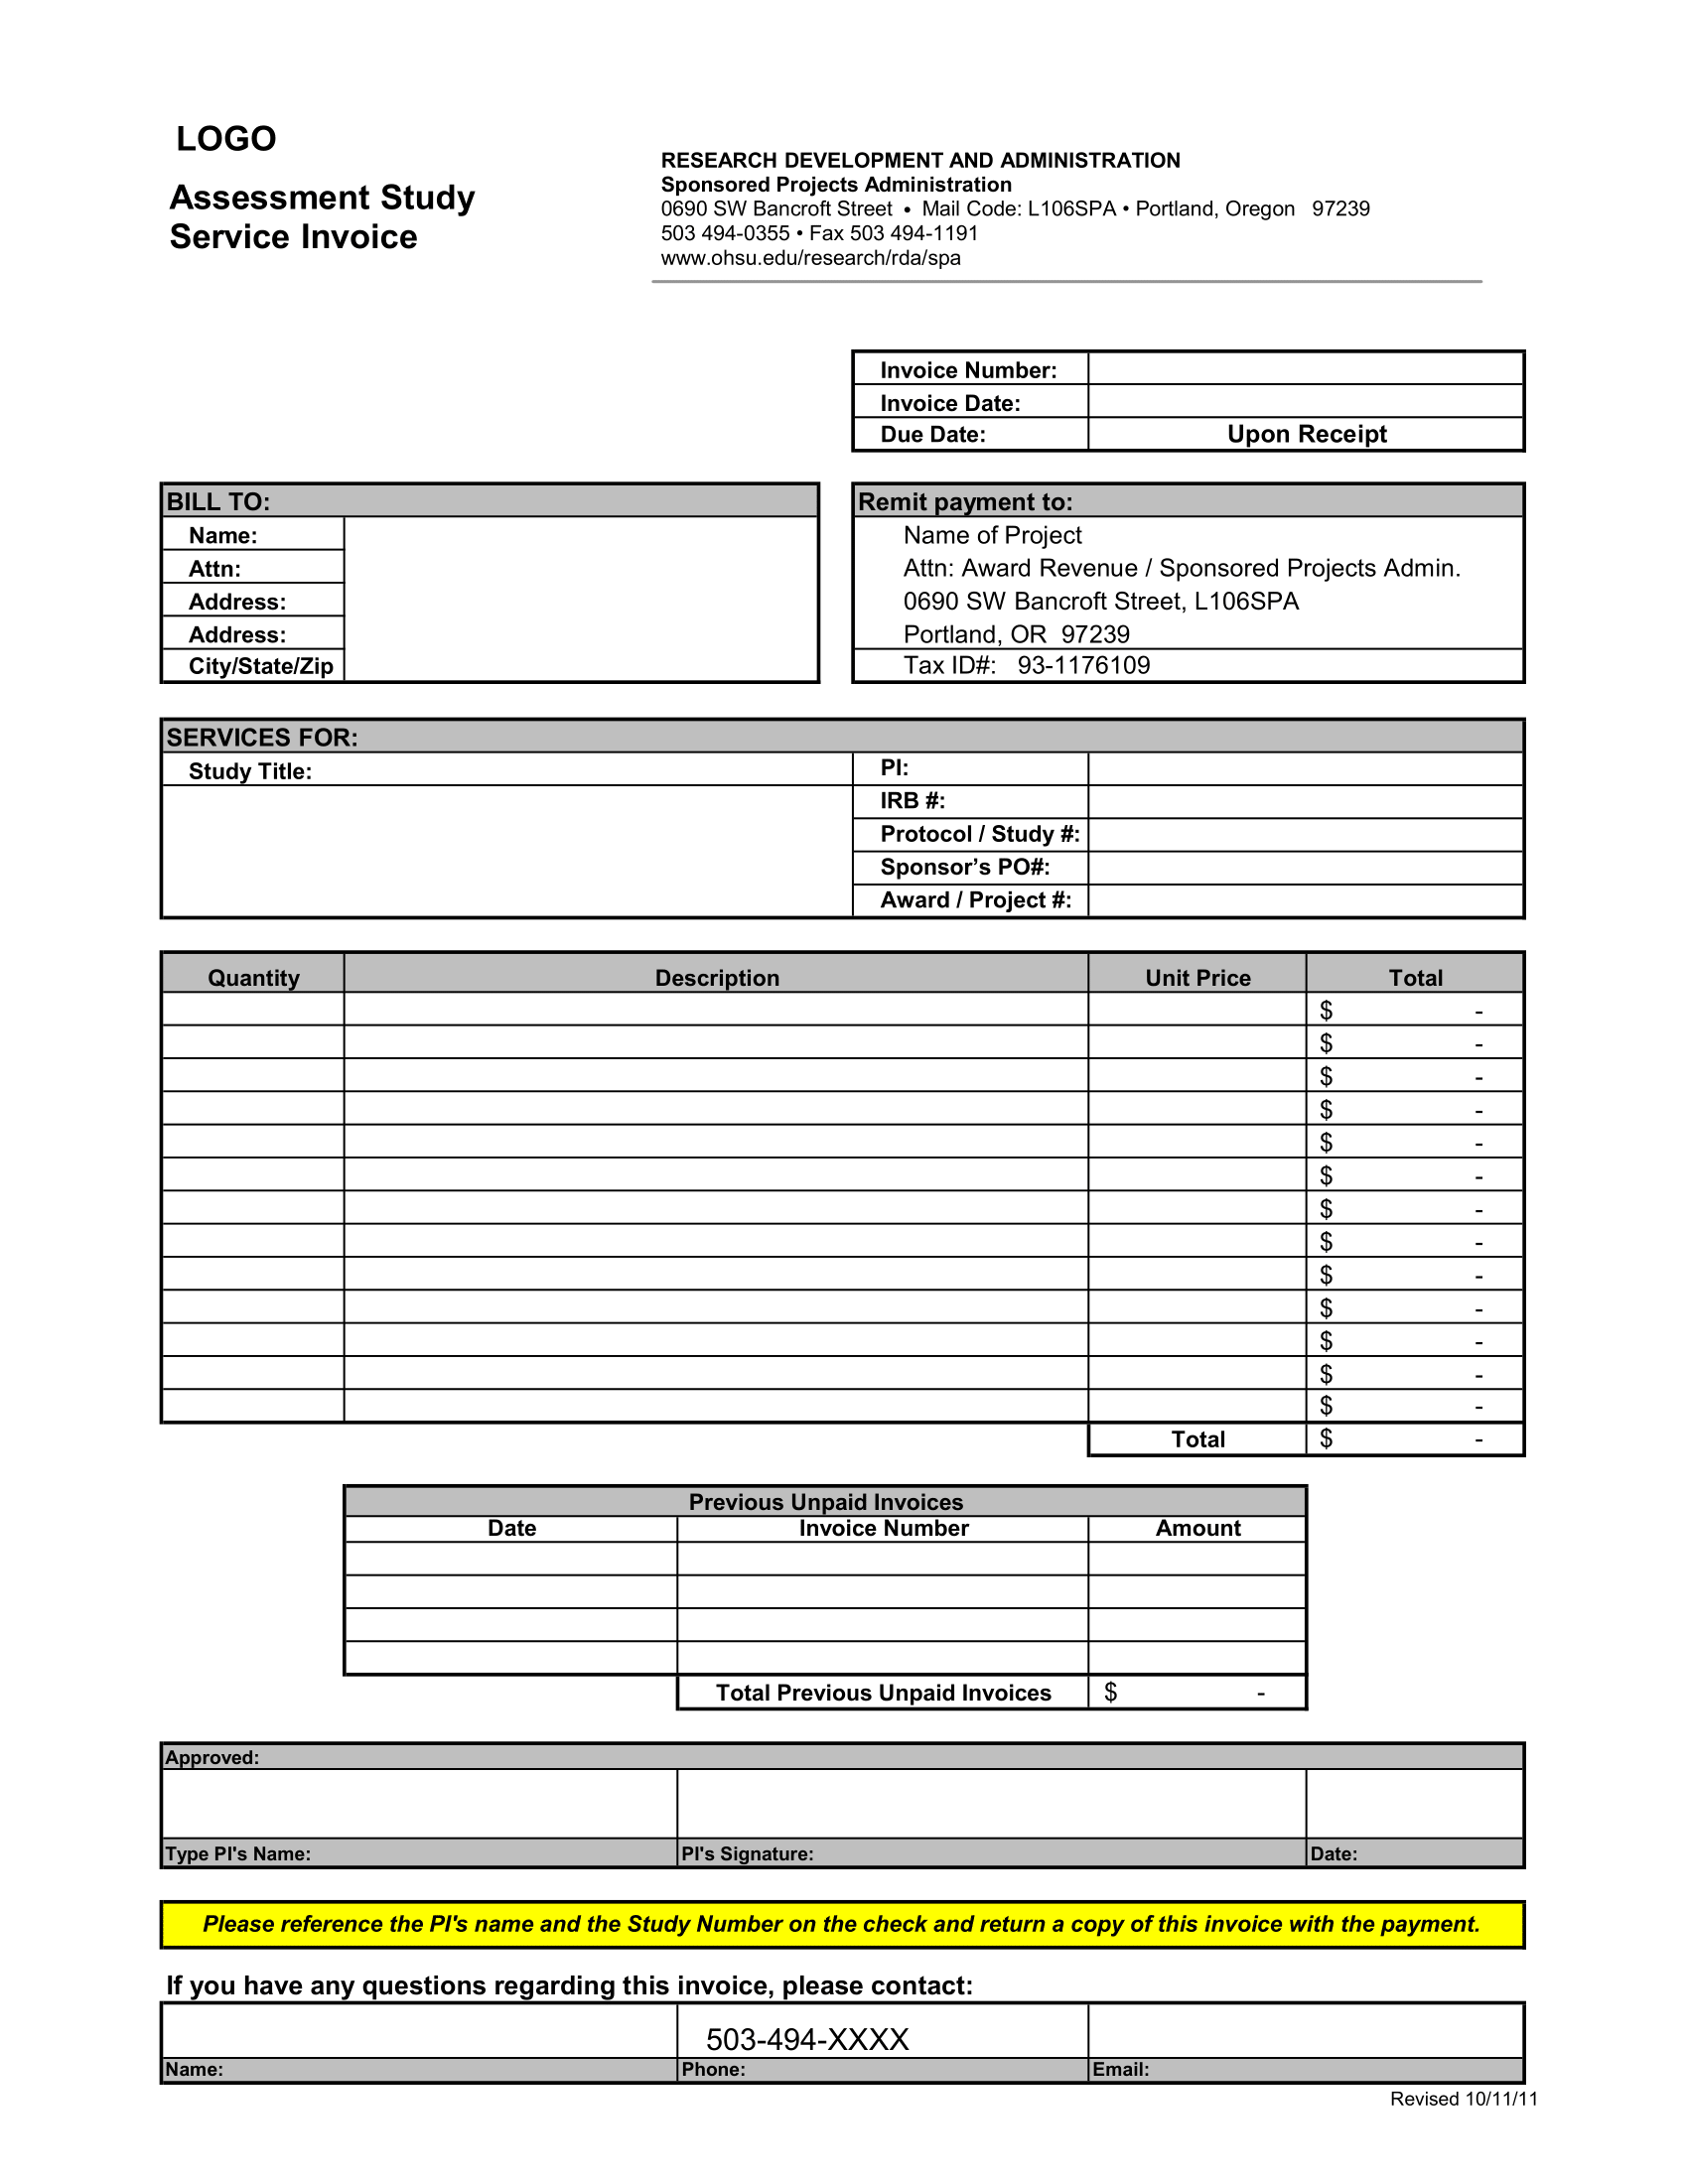 Assessment Study Service Invoice Template